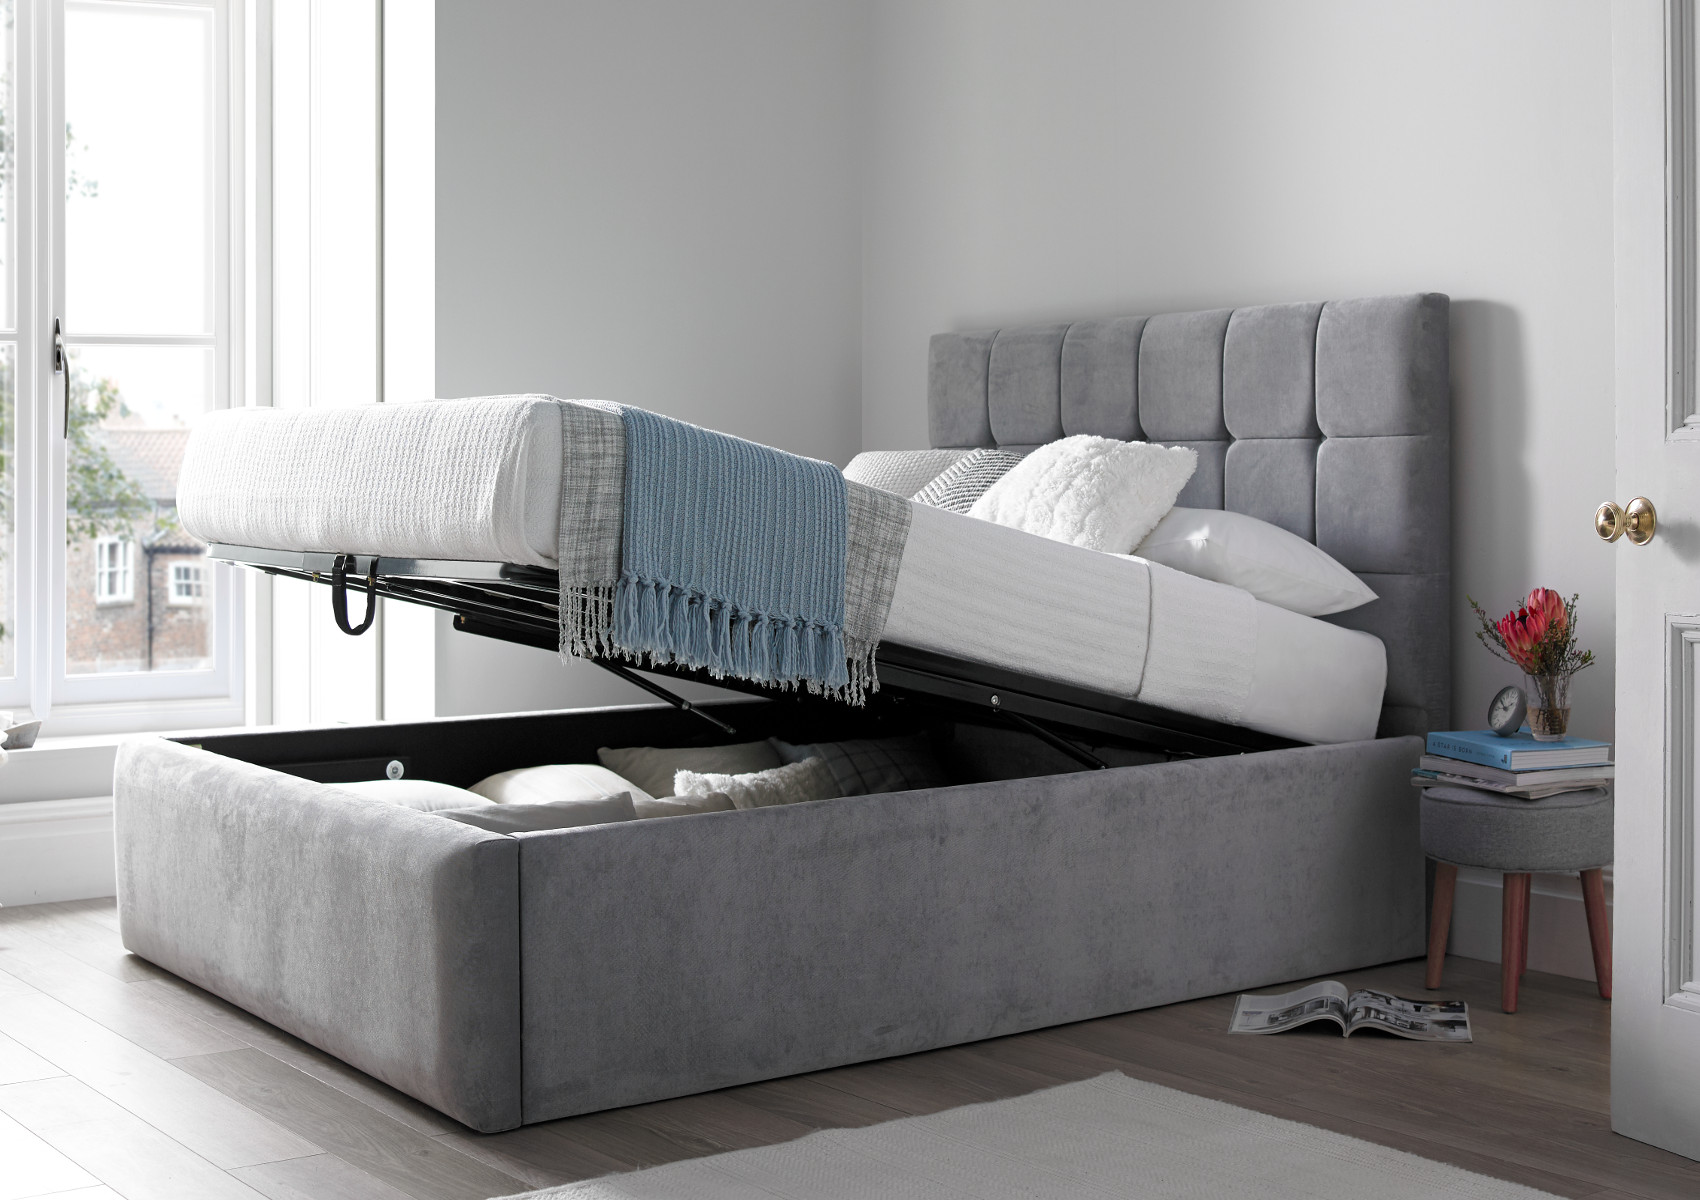 View Bromley Naples Silver Upholstered King Size Ottoman Bed Time4Sleep information